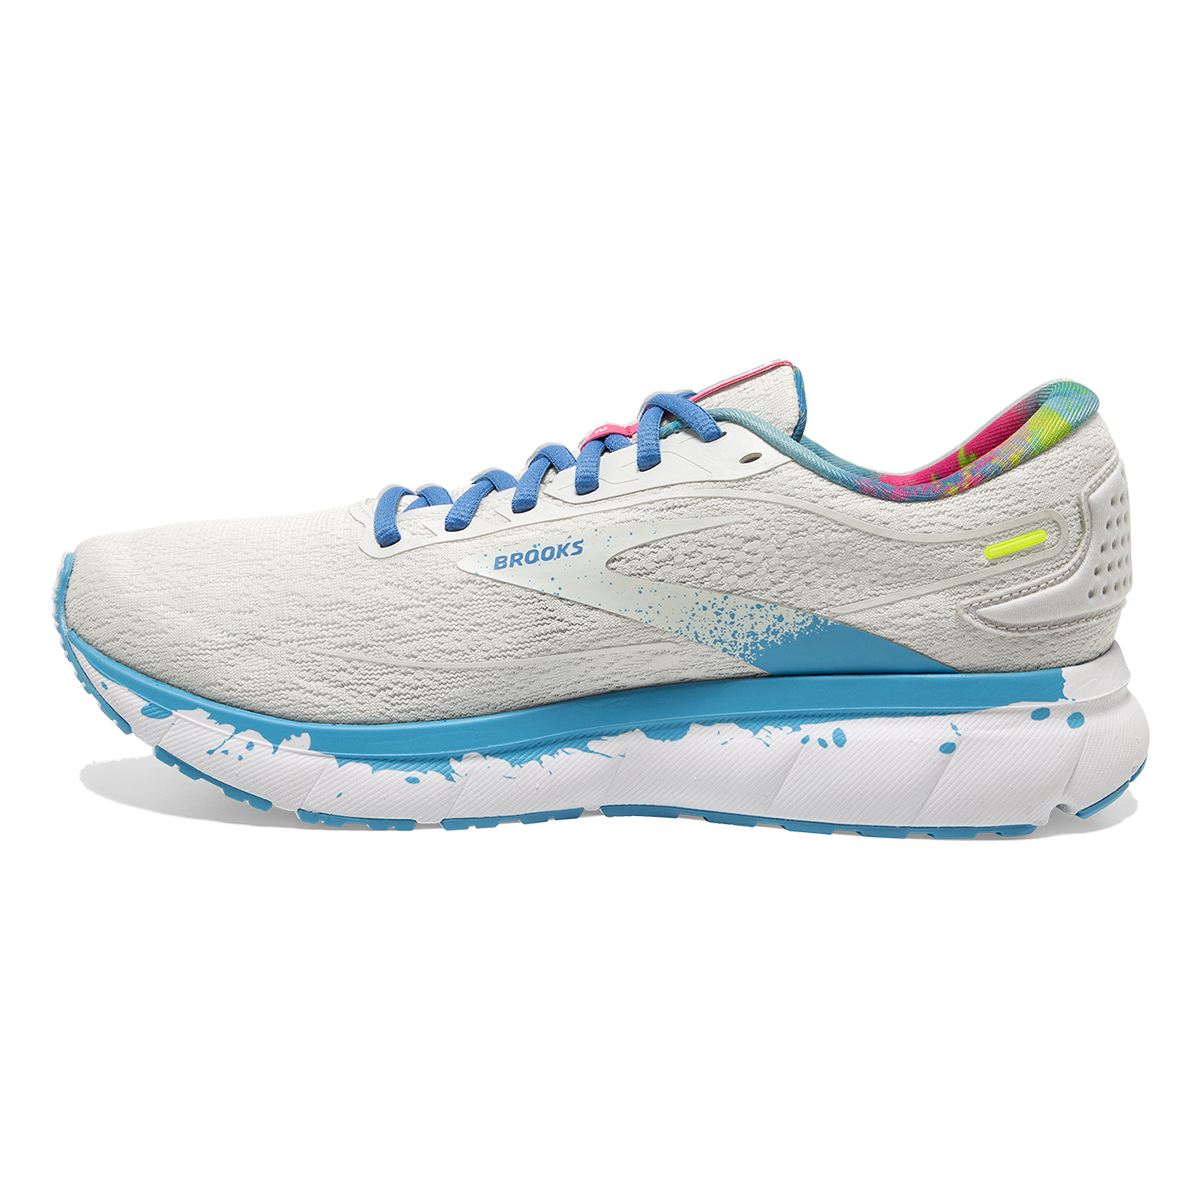 Brooks Trace 2 Drip, , large image number null